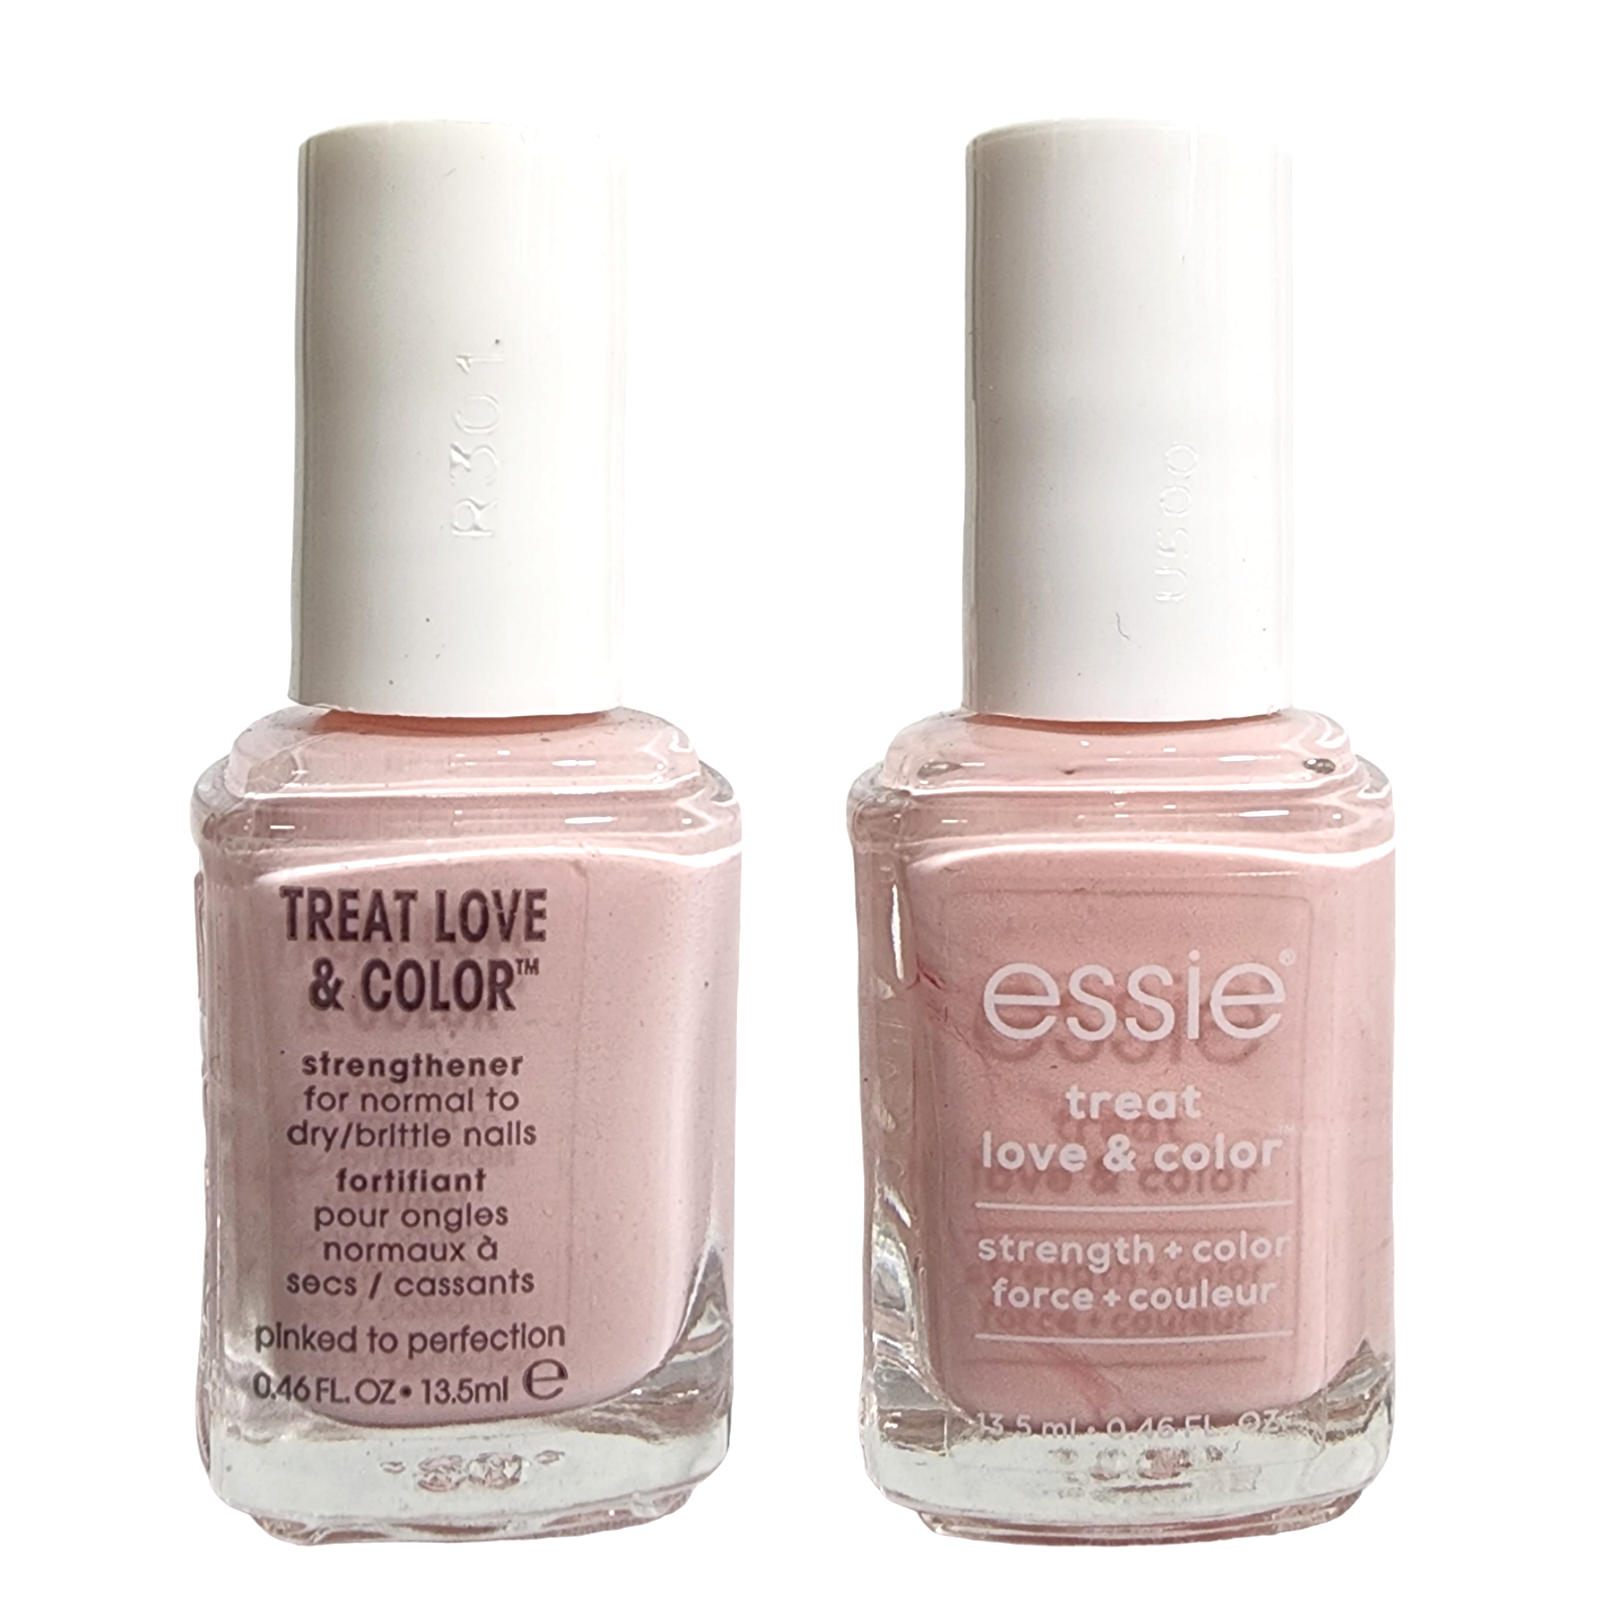 Essie Treat Love Color Strengthener Nail Polish Pink Pinked To Perfection 2 Pack essie 27